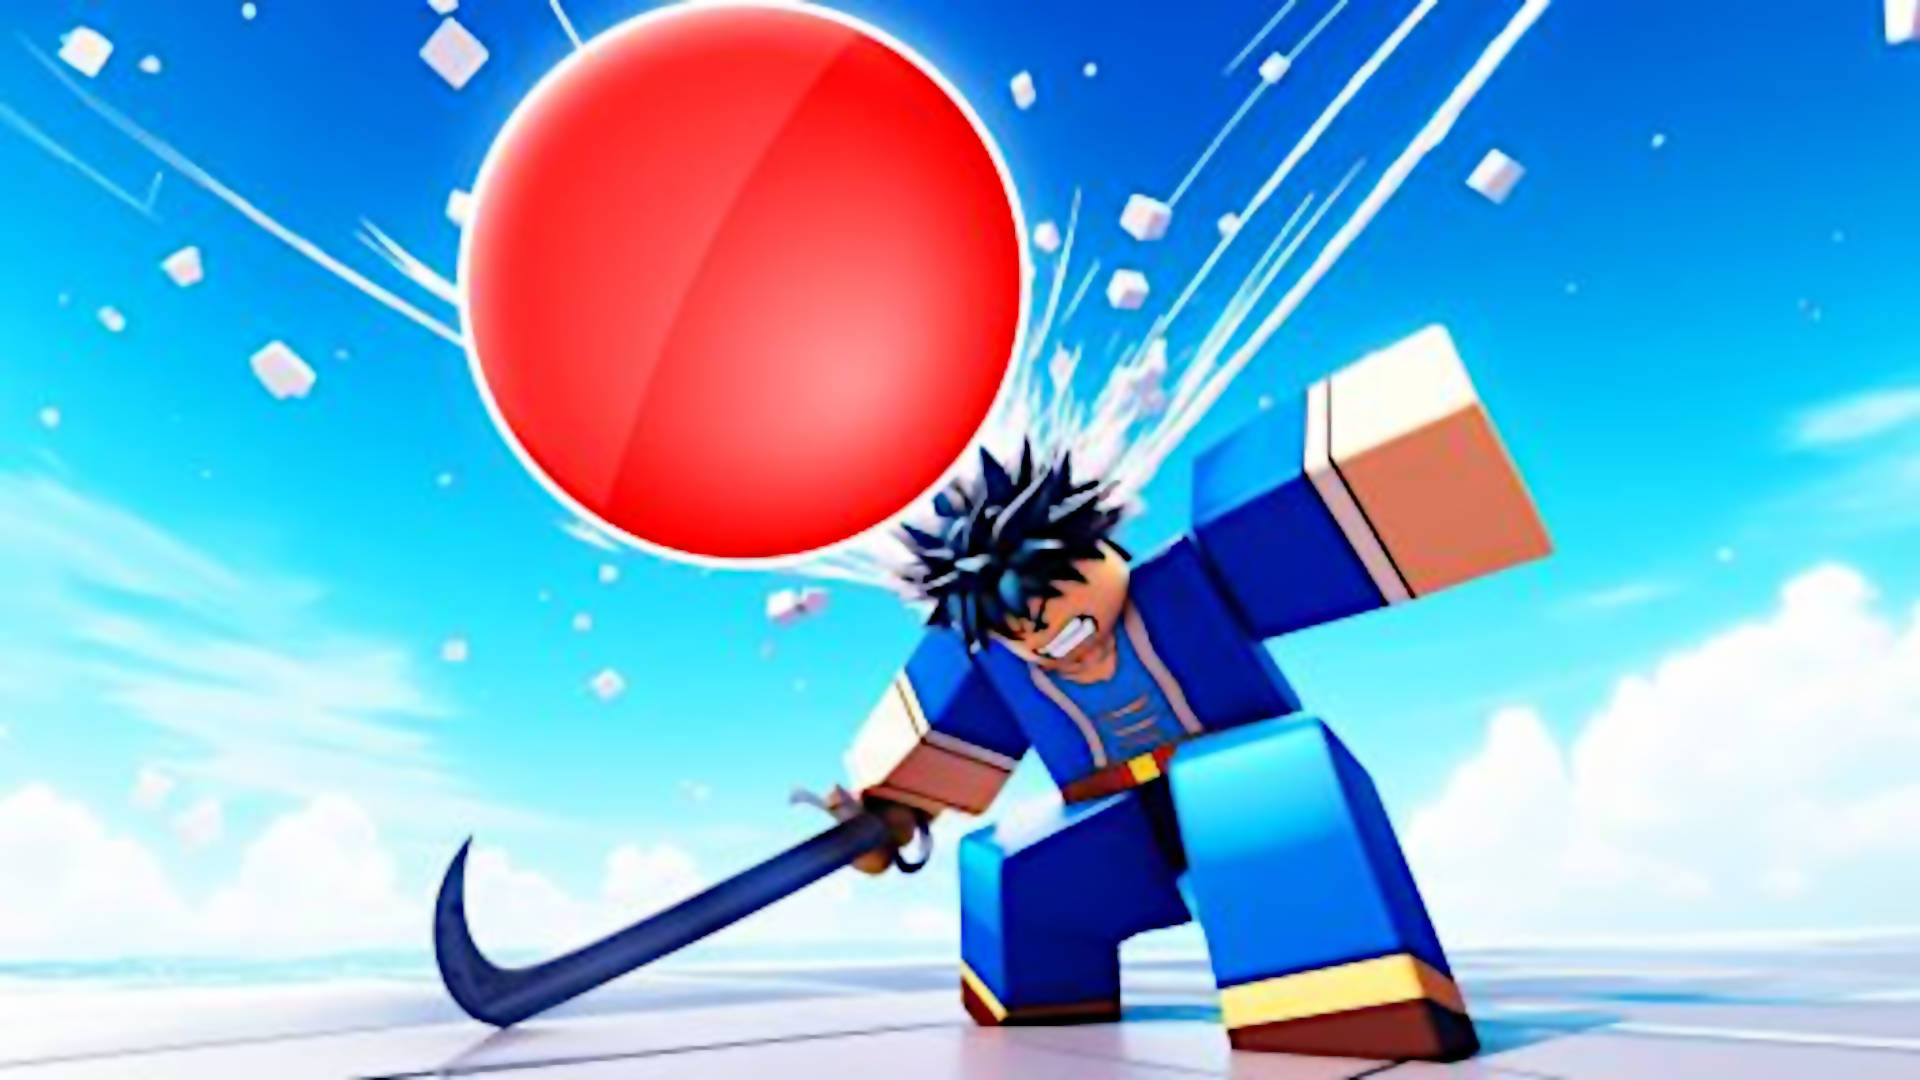 Best One Piece Games 2023 on Roblox